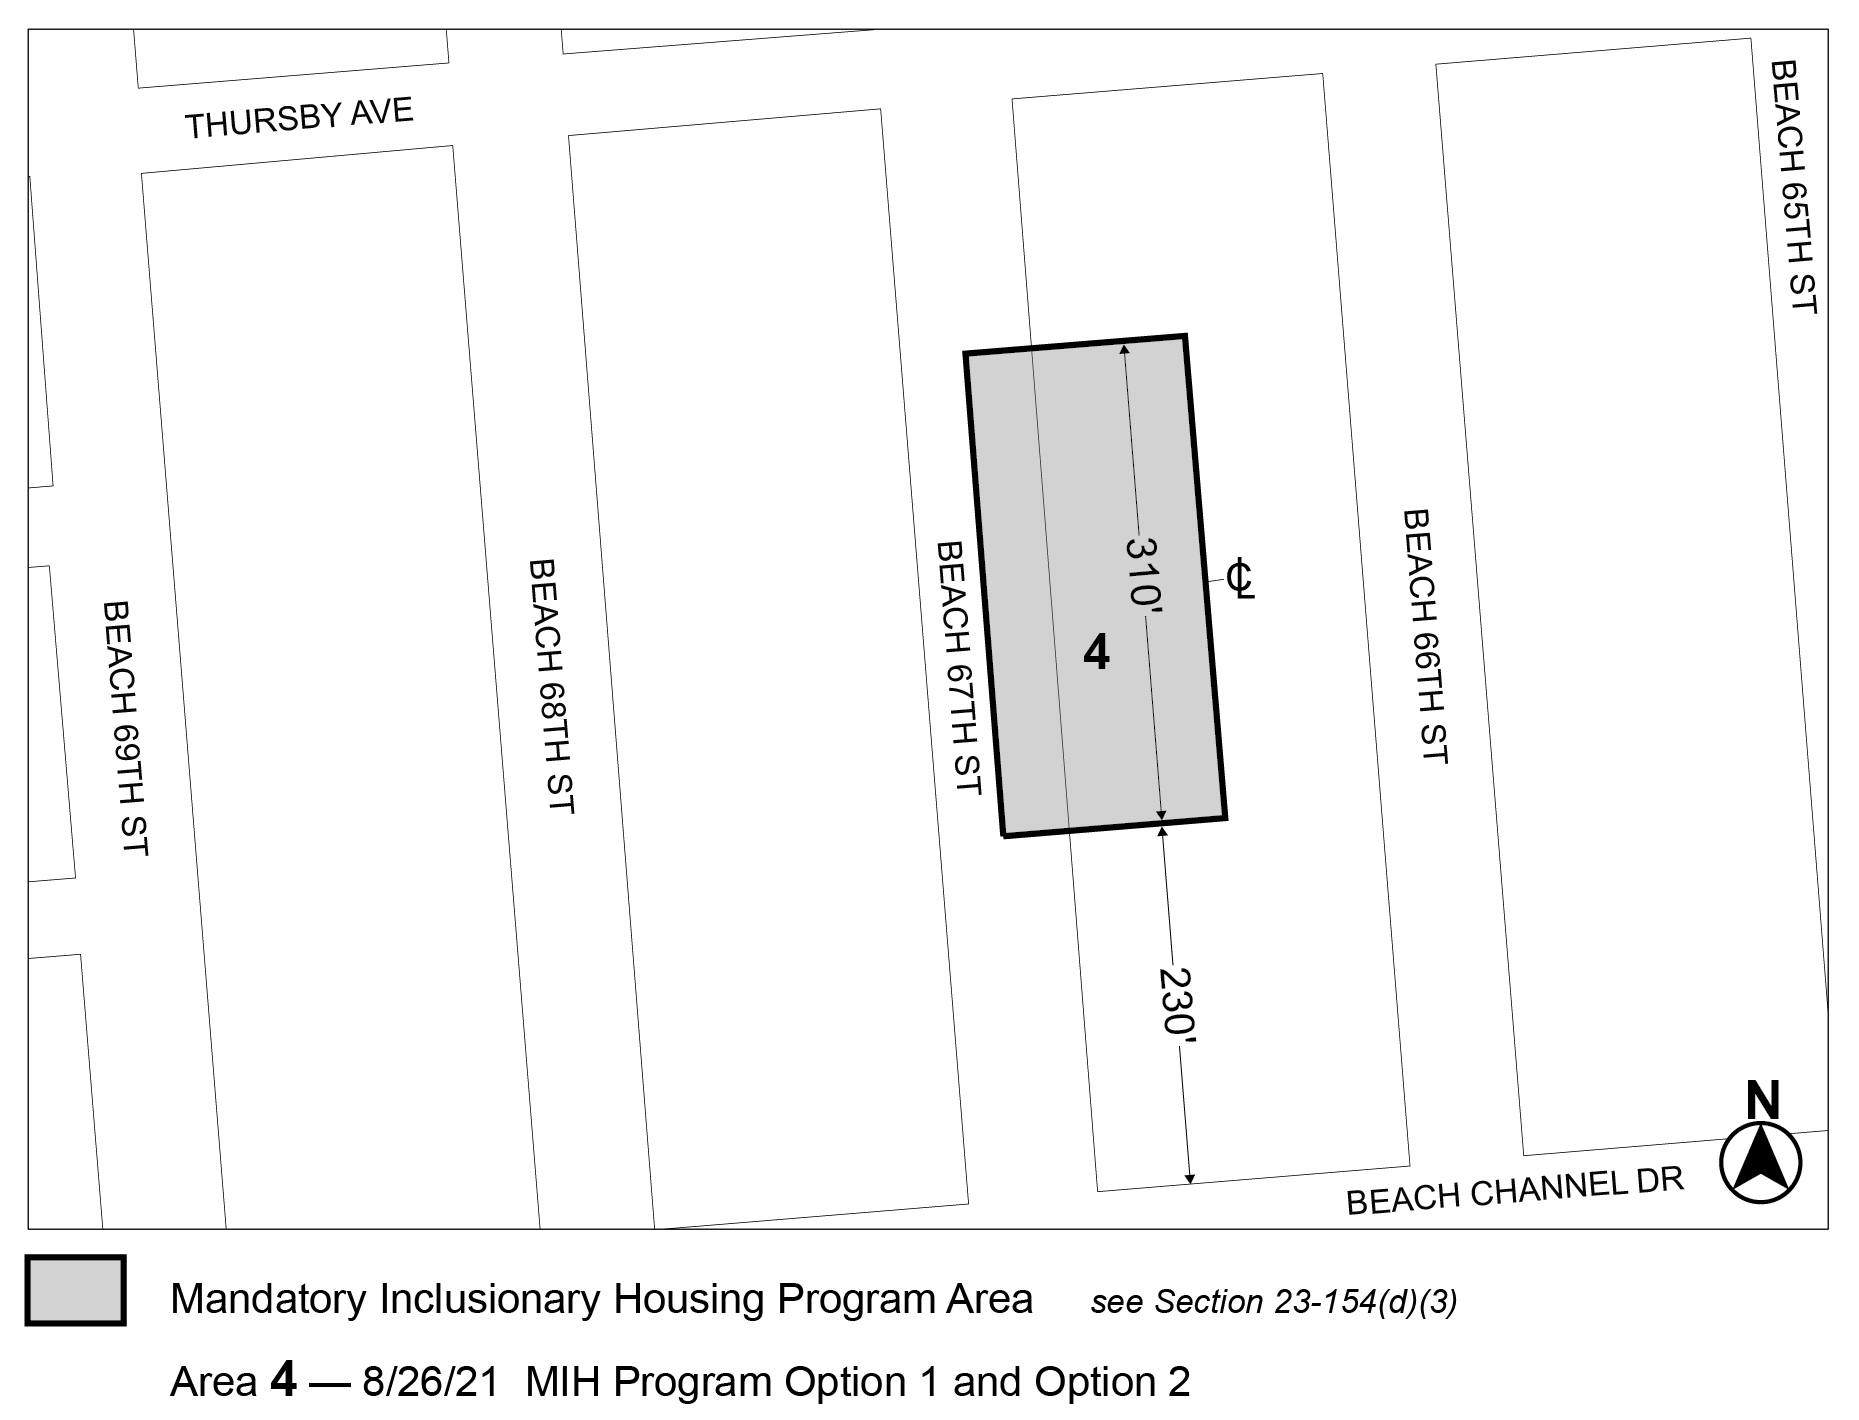 APPENDIX F, Queens CD 14, Map 4, MIH area 4 (Option 1, Option 2) added per Beach 67th Street (N 200231 ZRQ), adopted 26 August, 2021